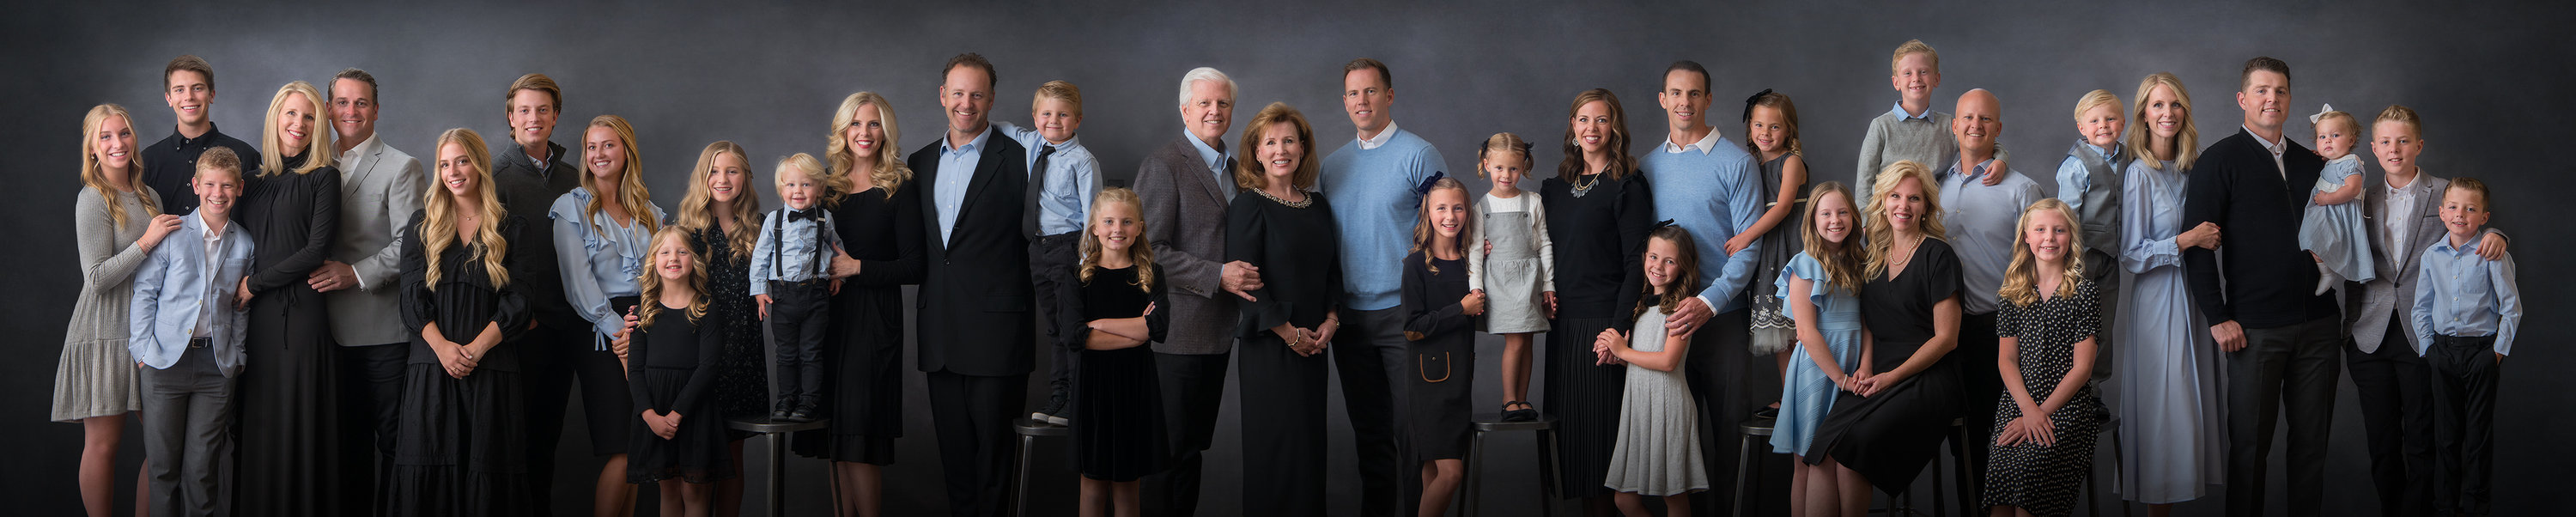 How to create a family portrait when you can't all be together - Park City  Family Portraits